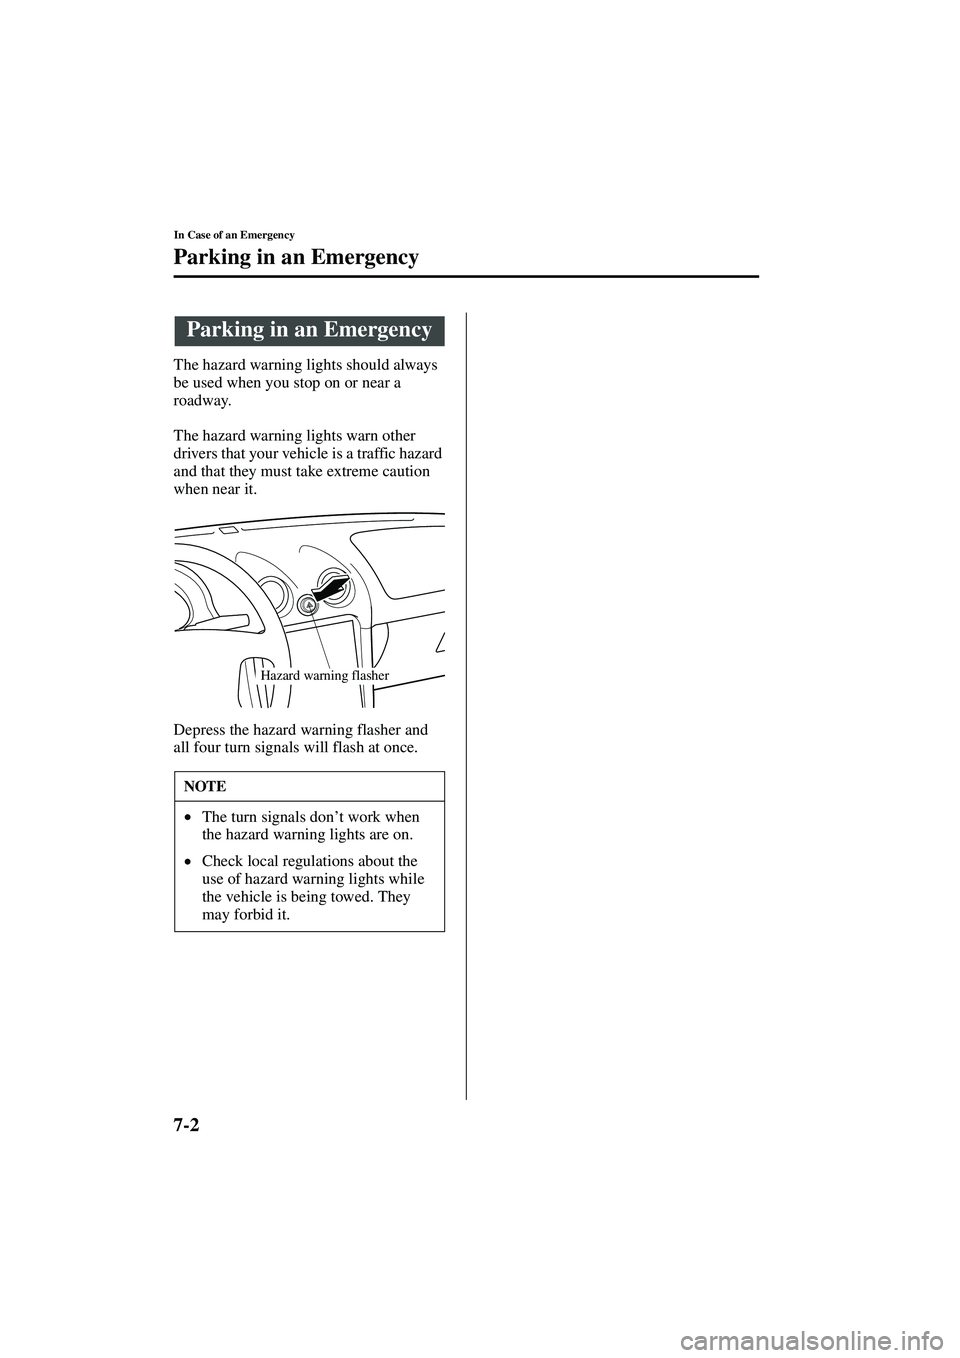 MAZDA MODEL MX-5 MIATA 2004  Owners Manual 7-2
In Case of an Emergency
Form No. 8S15-EA-03G
Parking in an Emergency
The hazard warning lights should always 
be used when you stop on or near a 
roadway.
The hazard warning lights warn other 
dri